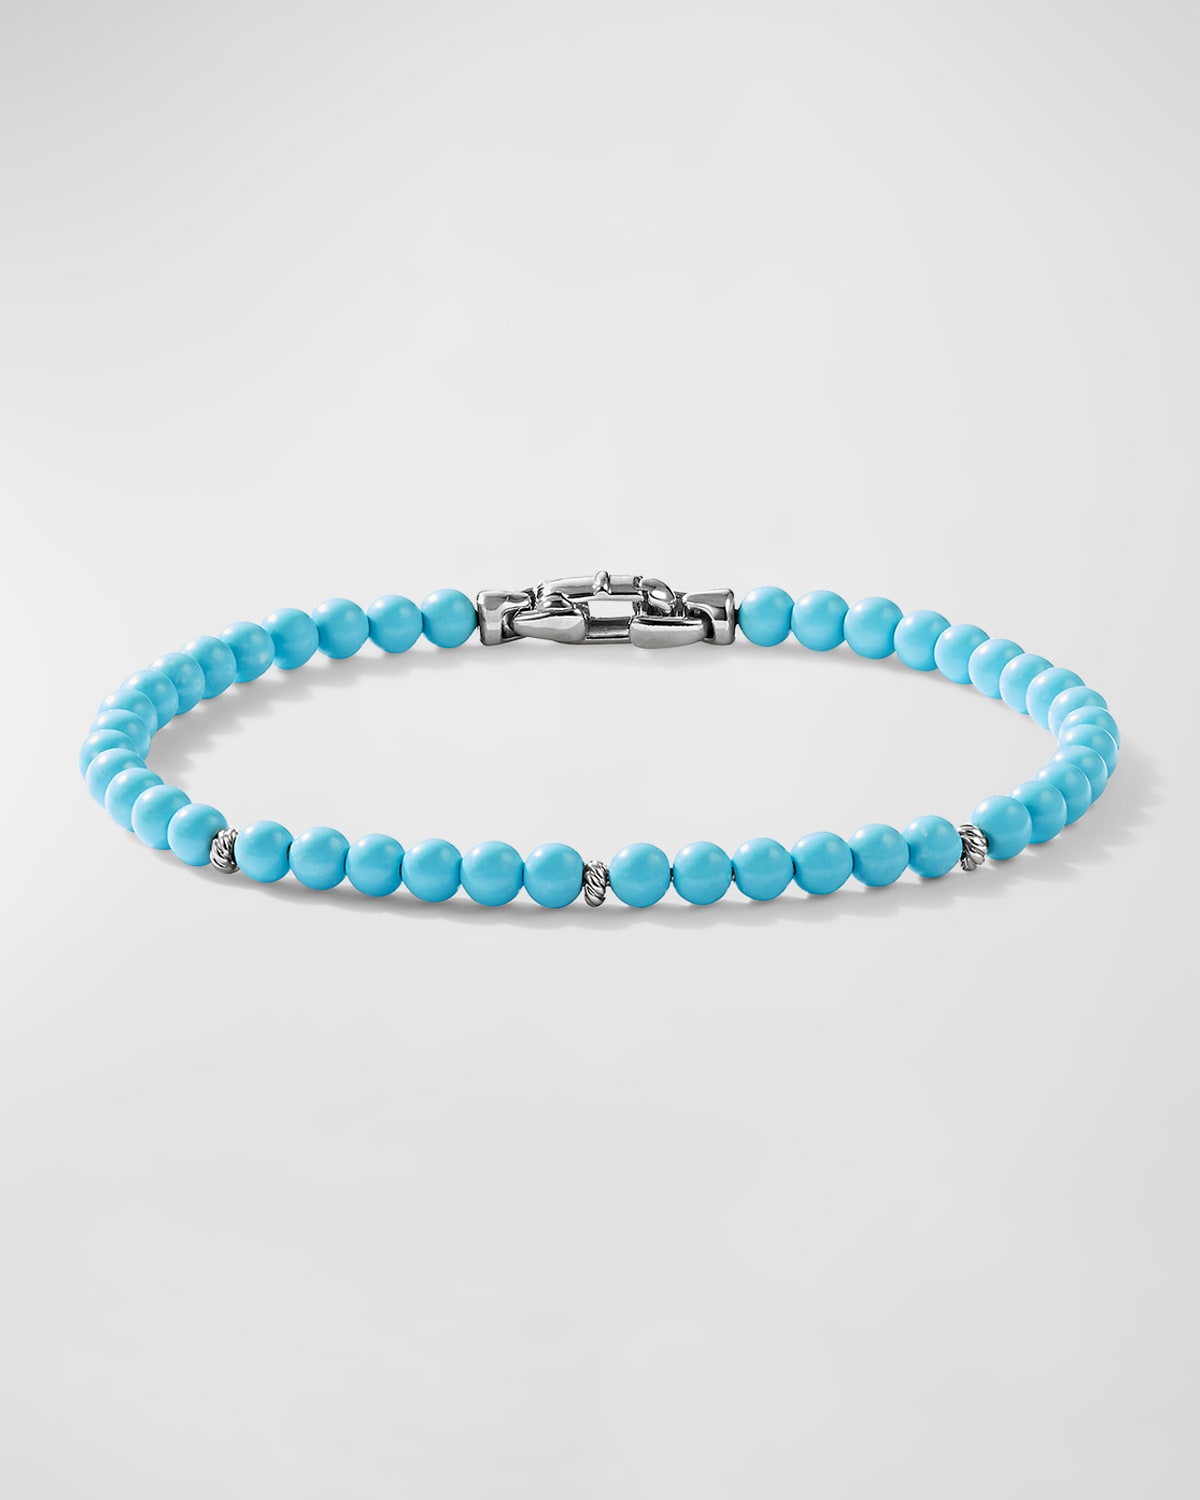 Bijoux Spiritual Bead Bracelet with Turquoise and Silver, 4mm